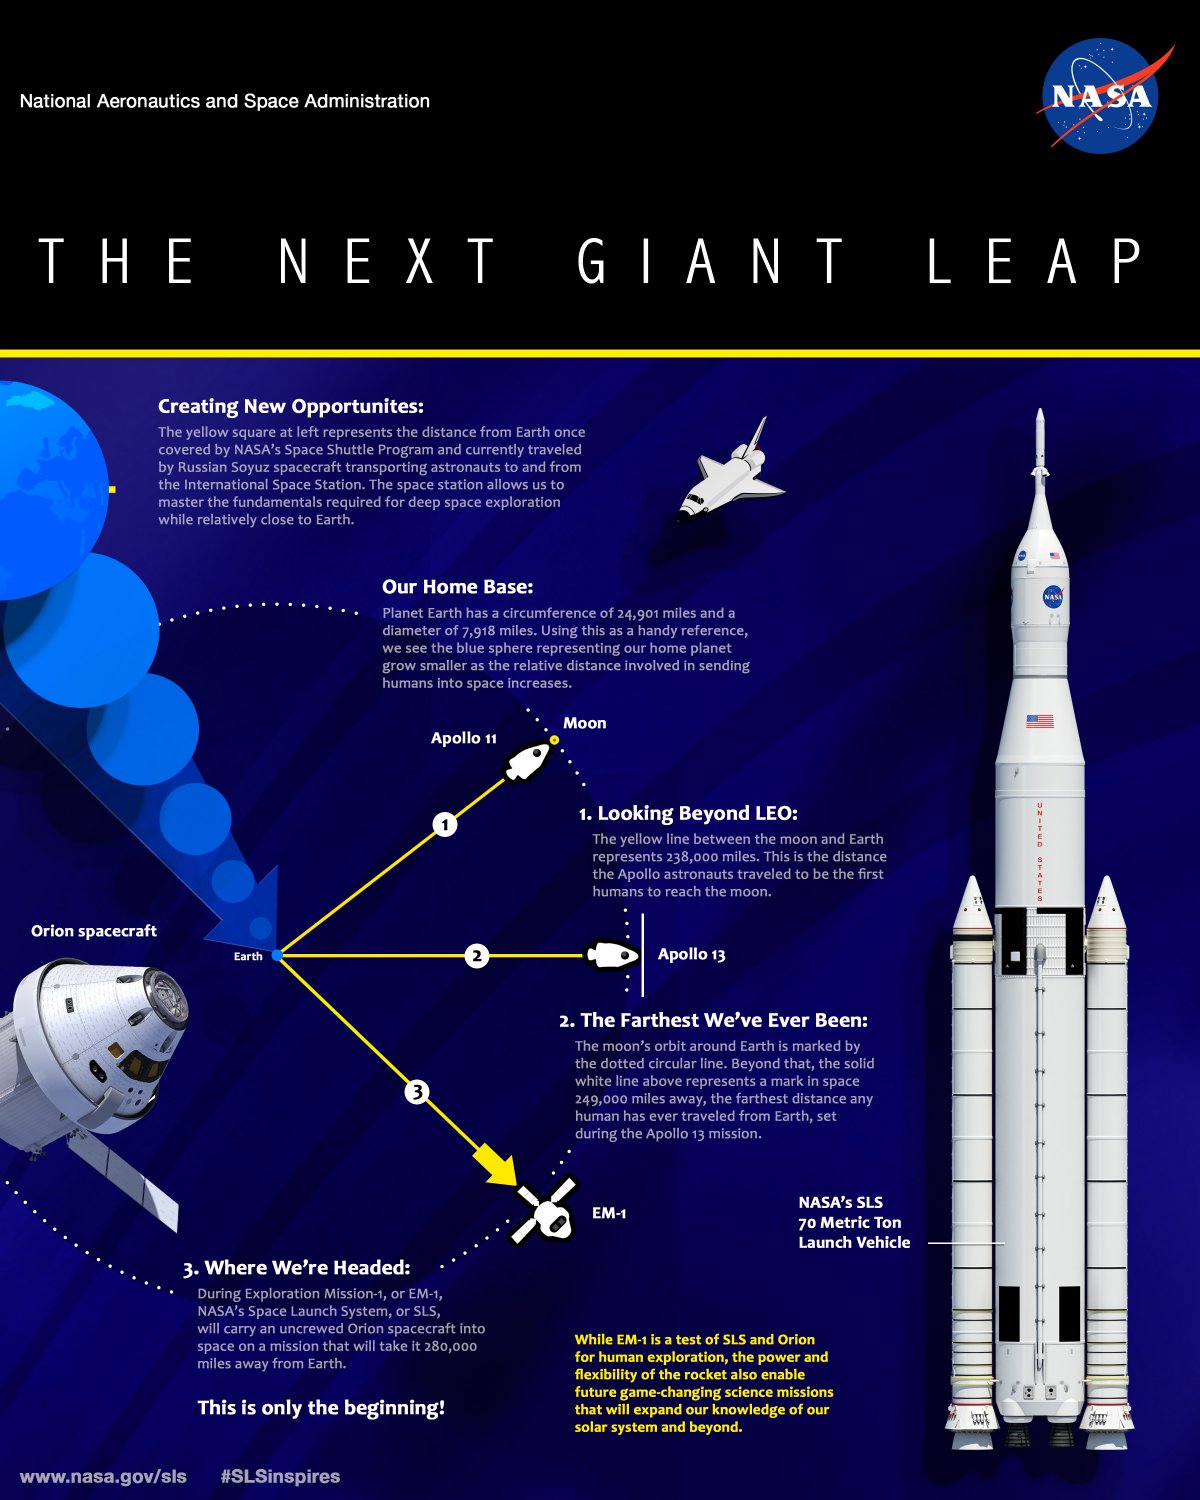 check-out-past-achievements-for-how-far-humans-have-ventured-into-space-and-where-the-sls-will-take-us-next